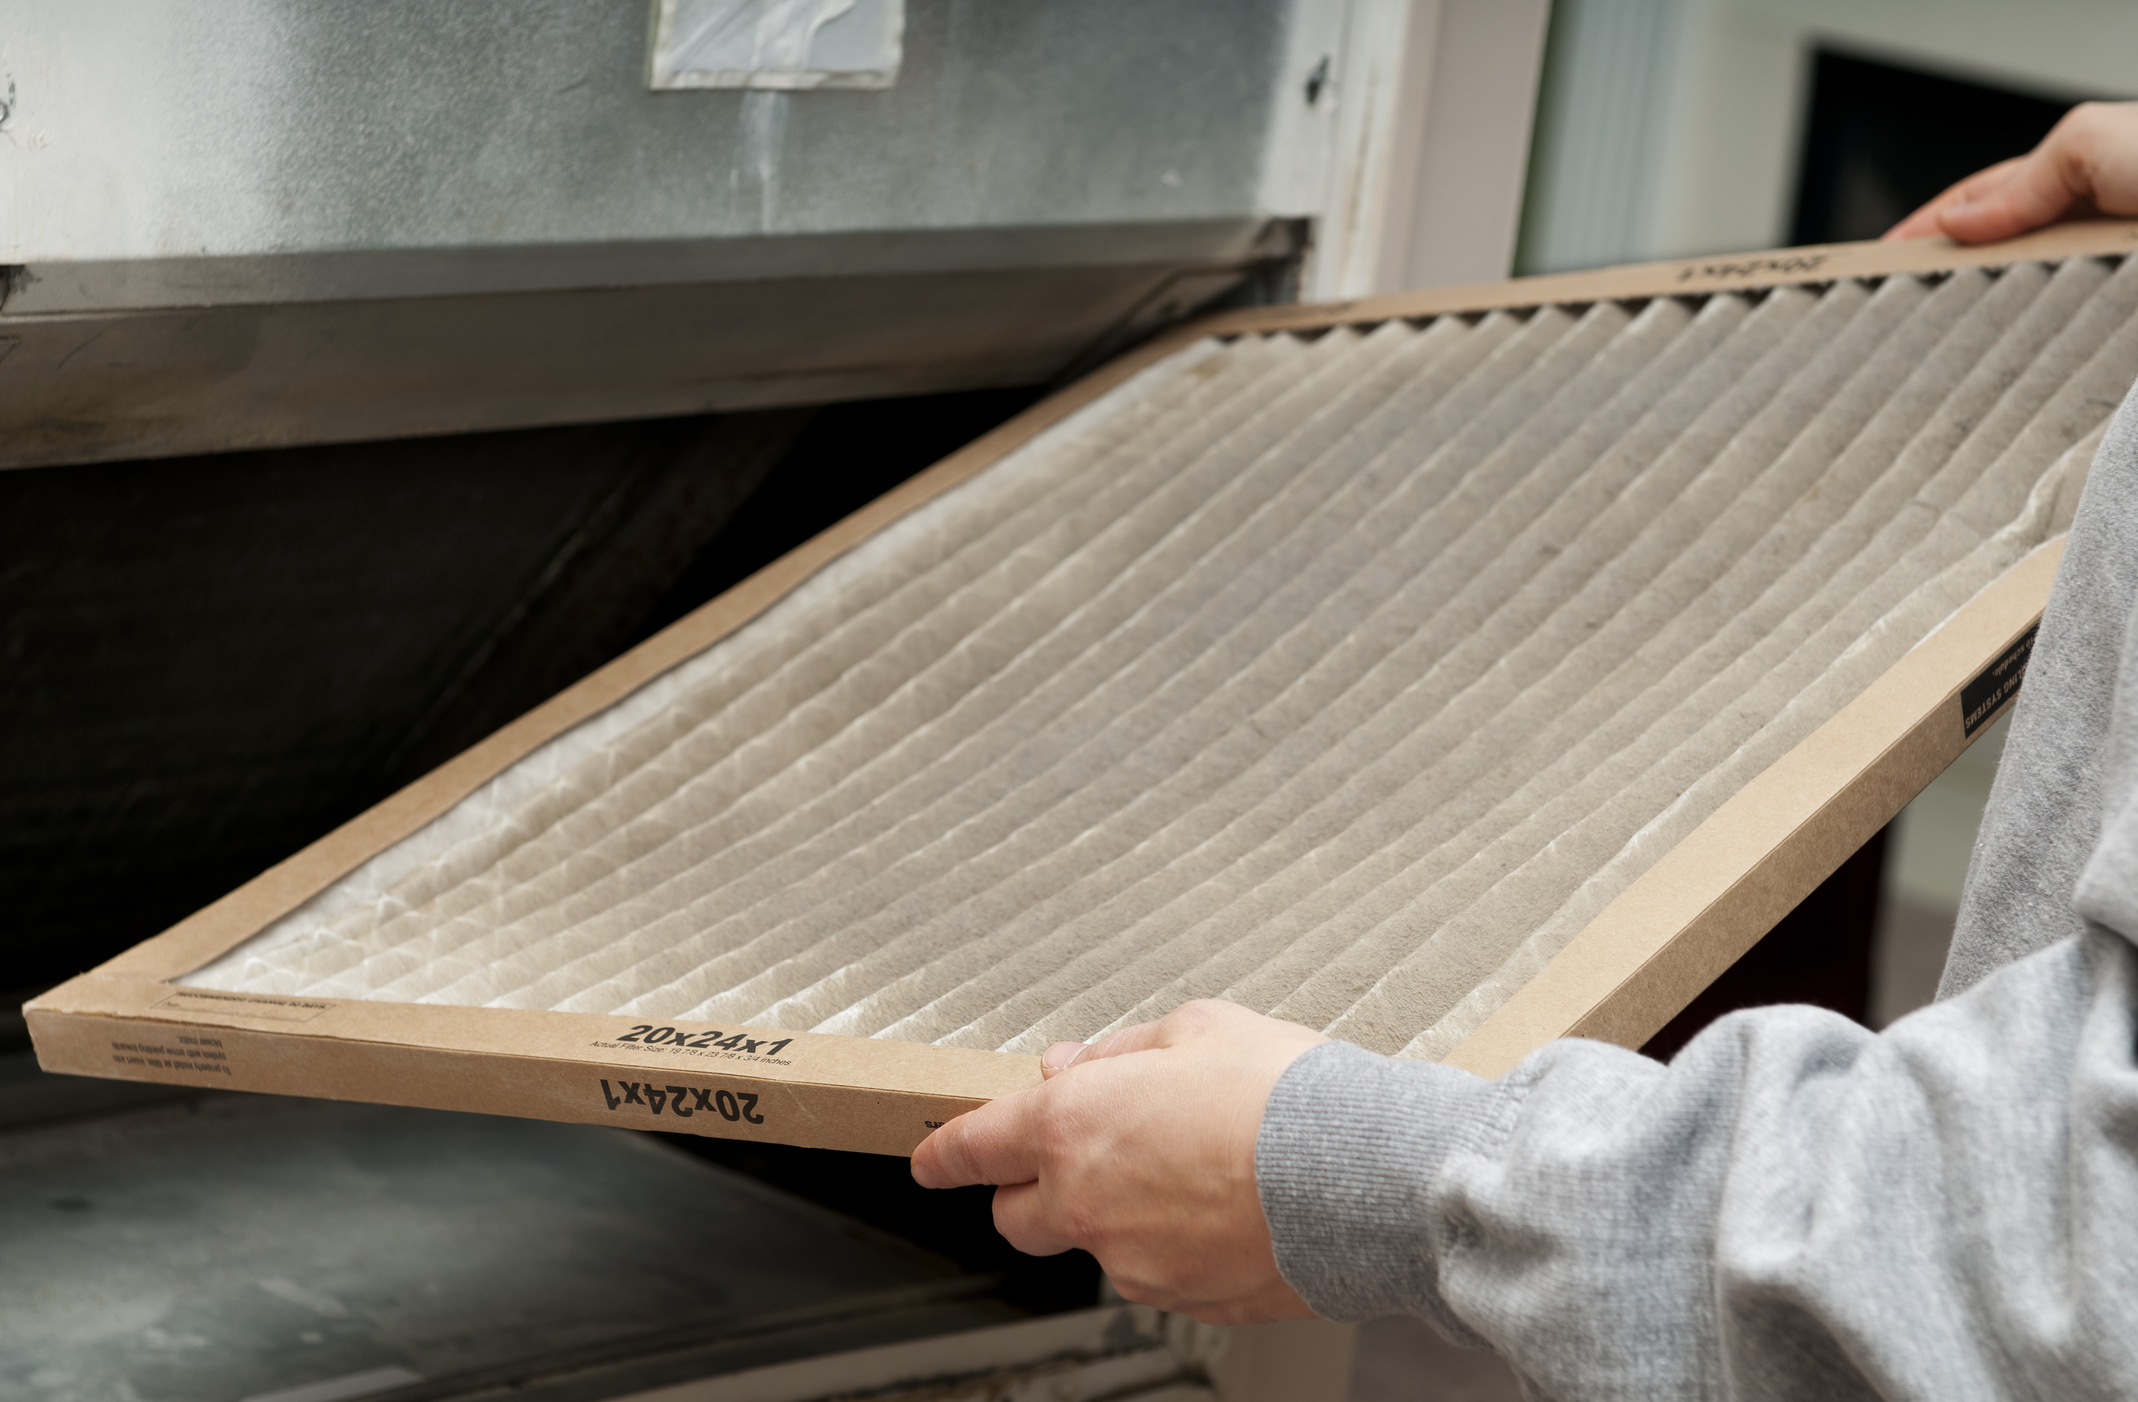 What Is The Difference Between Cheap And Expensive Furnace Filters?